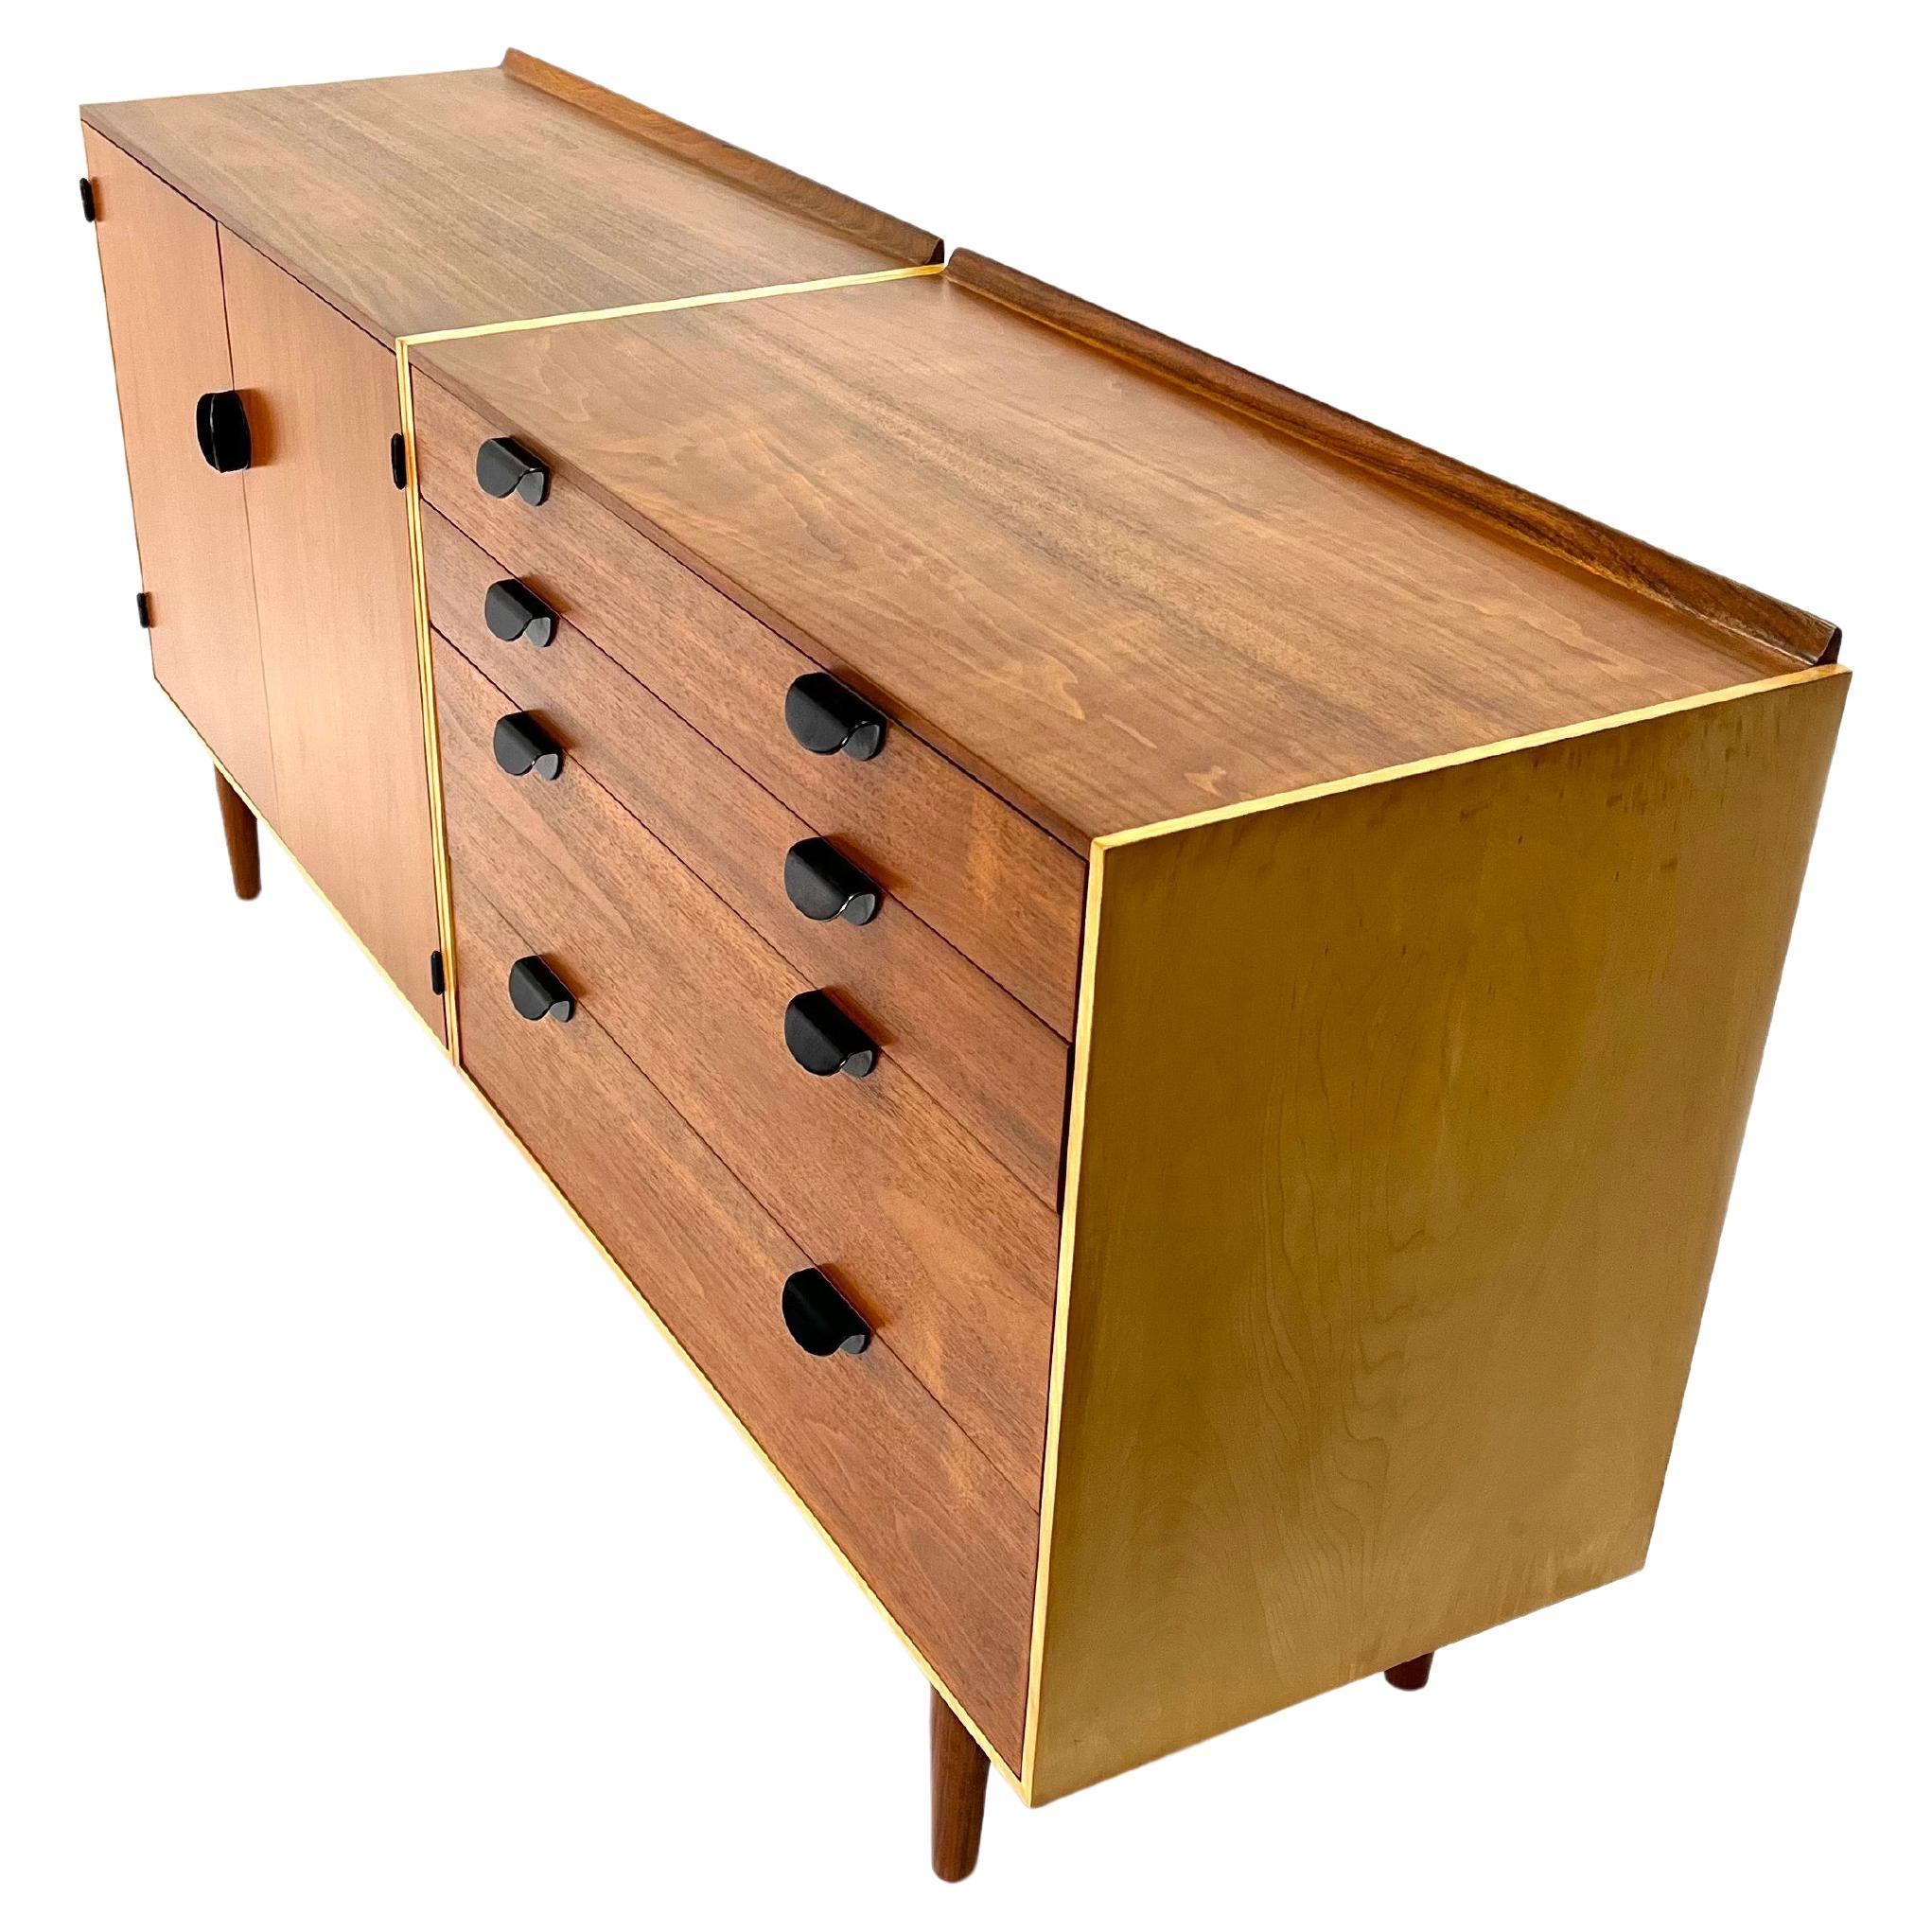 This incredible teak and maple credenza is designed by Finn Juhl and is fully restored. This is a beautiful example of his work. The teak case is topped with a raised back-rail, four stacked drawers with black enamel brass pulls raised on tapered